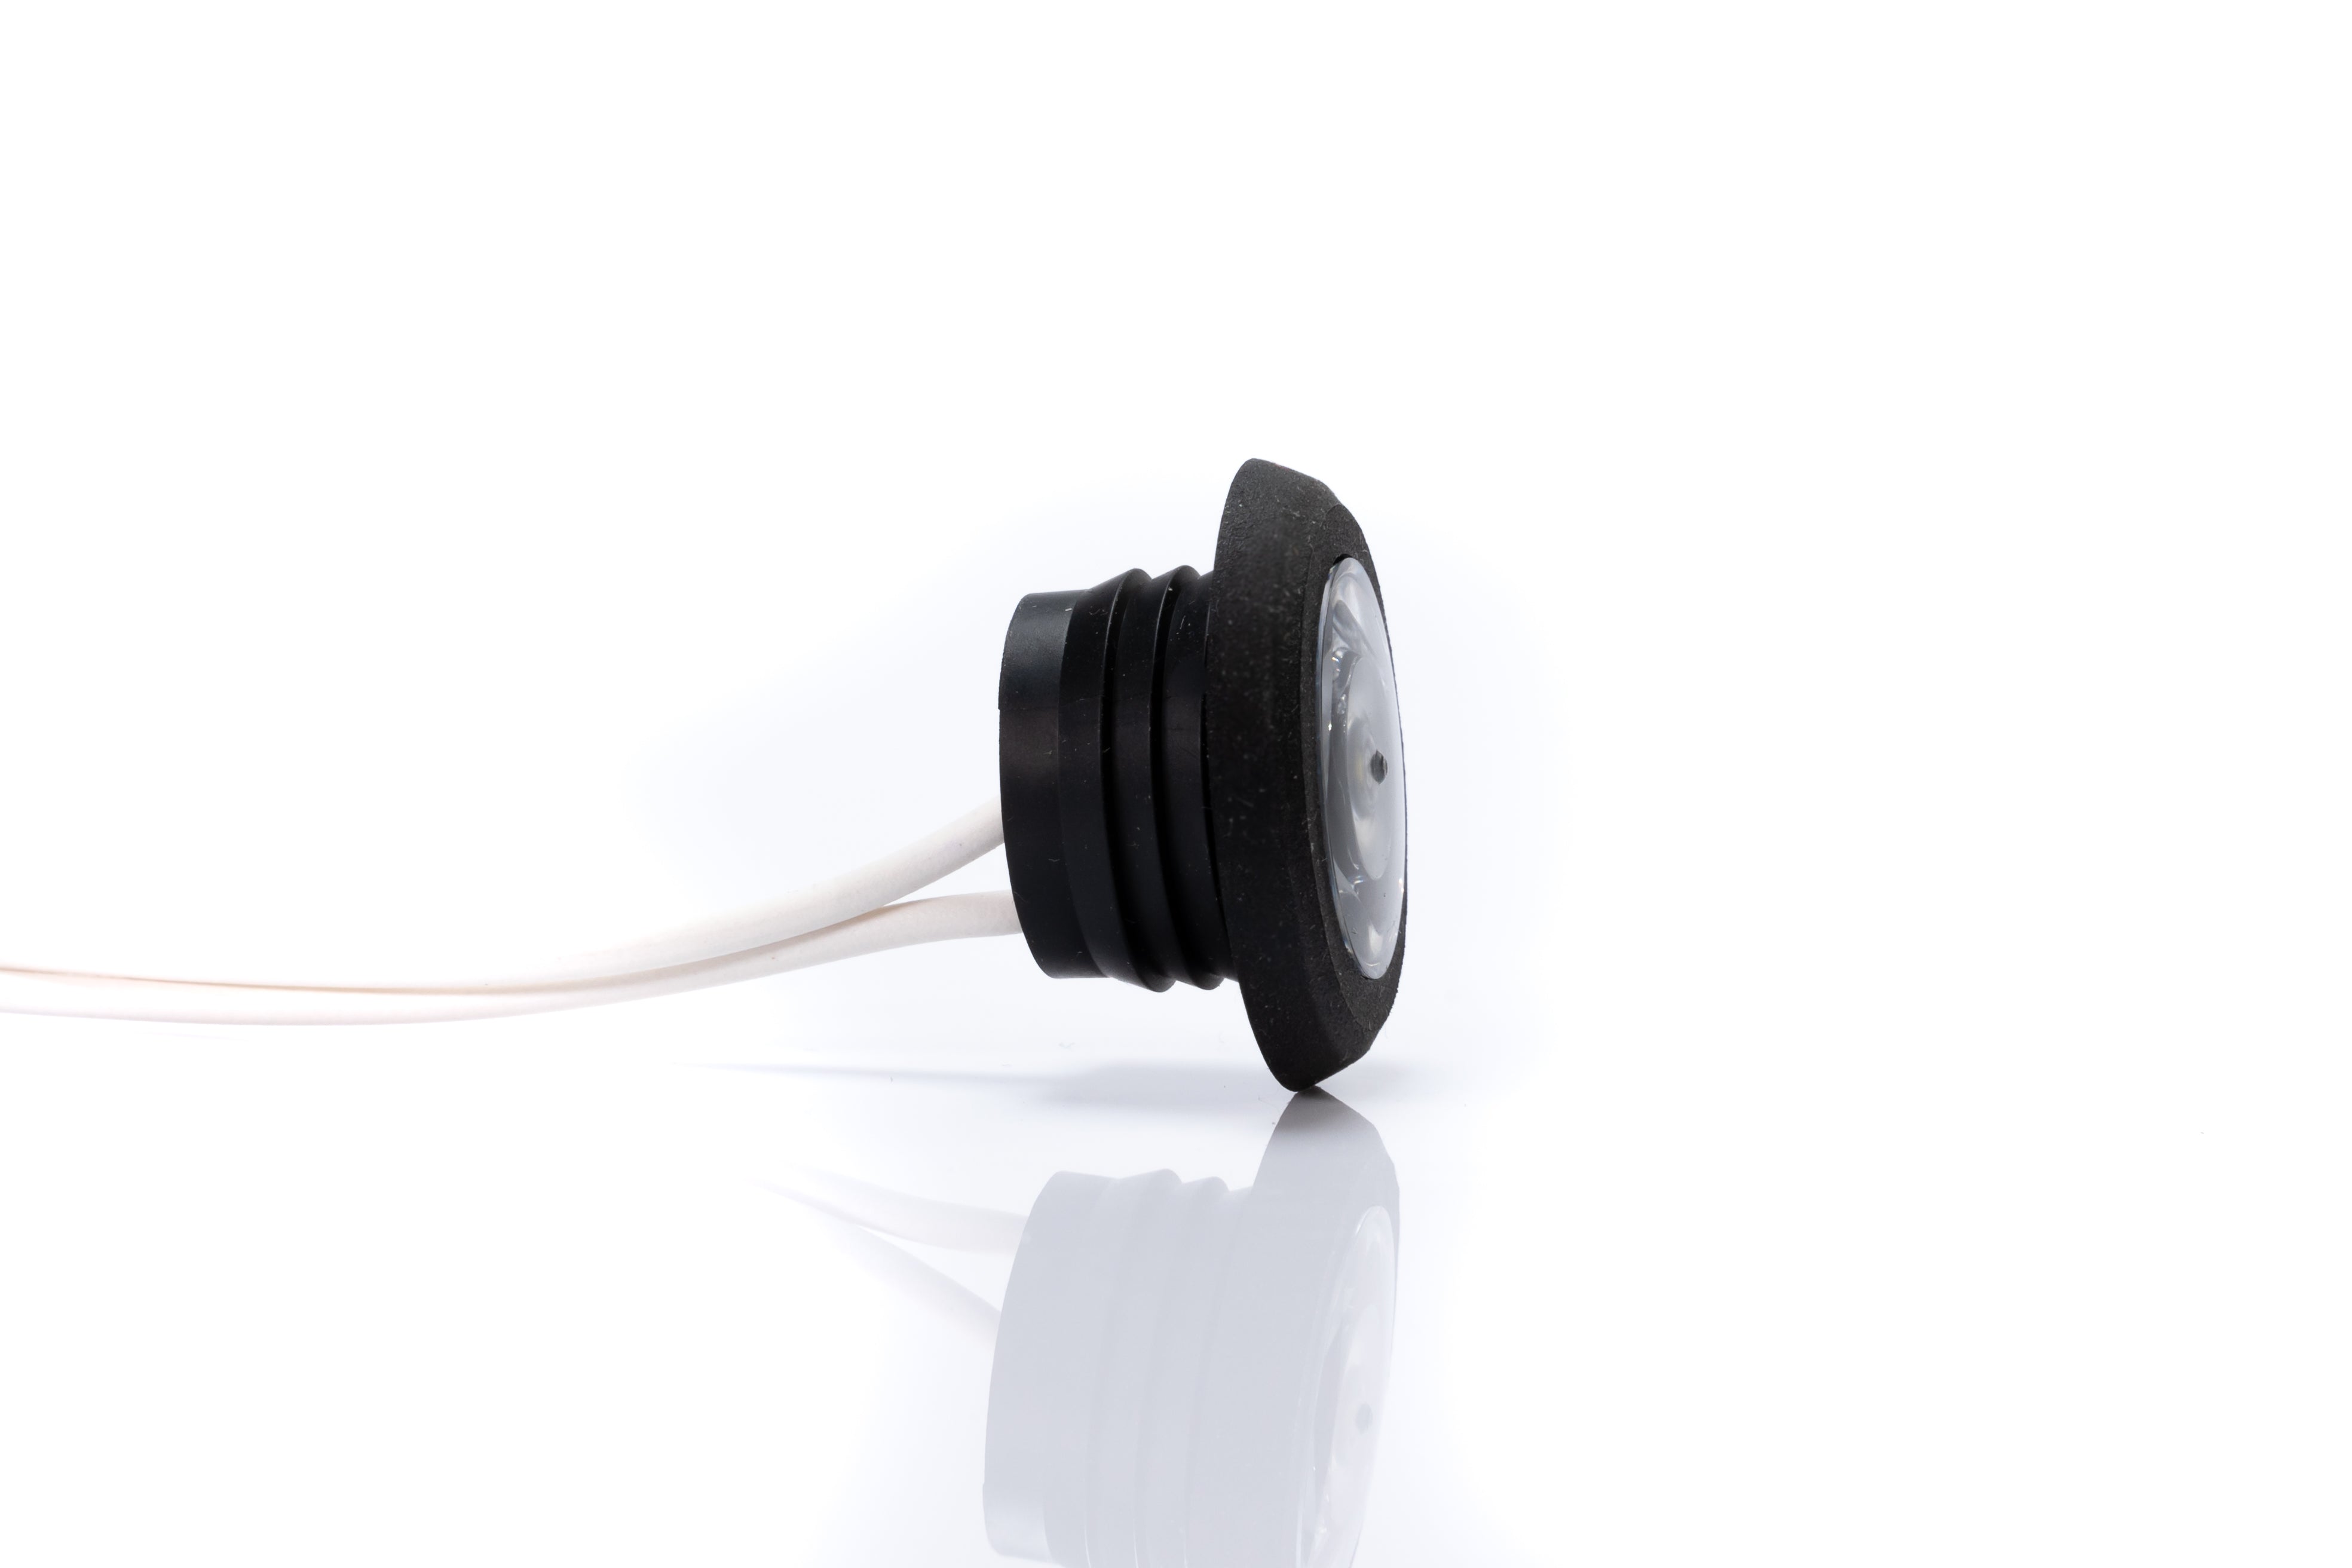 LED Bulls Eye Round Marker Lamp with Flat & Curved Gasket - spo-cs-disabled - spo-default - spo-disabled - spo-notify-m